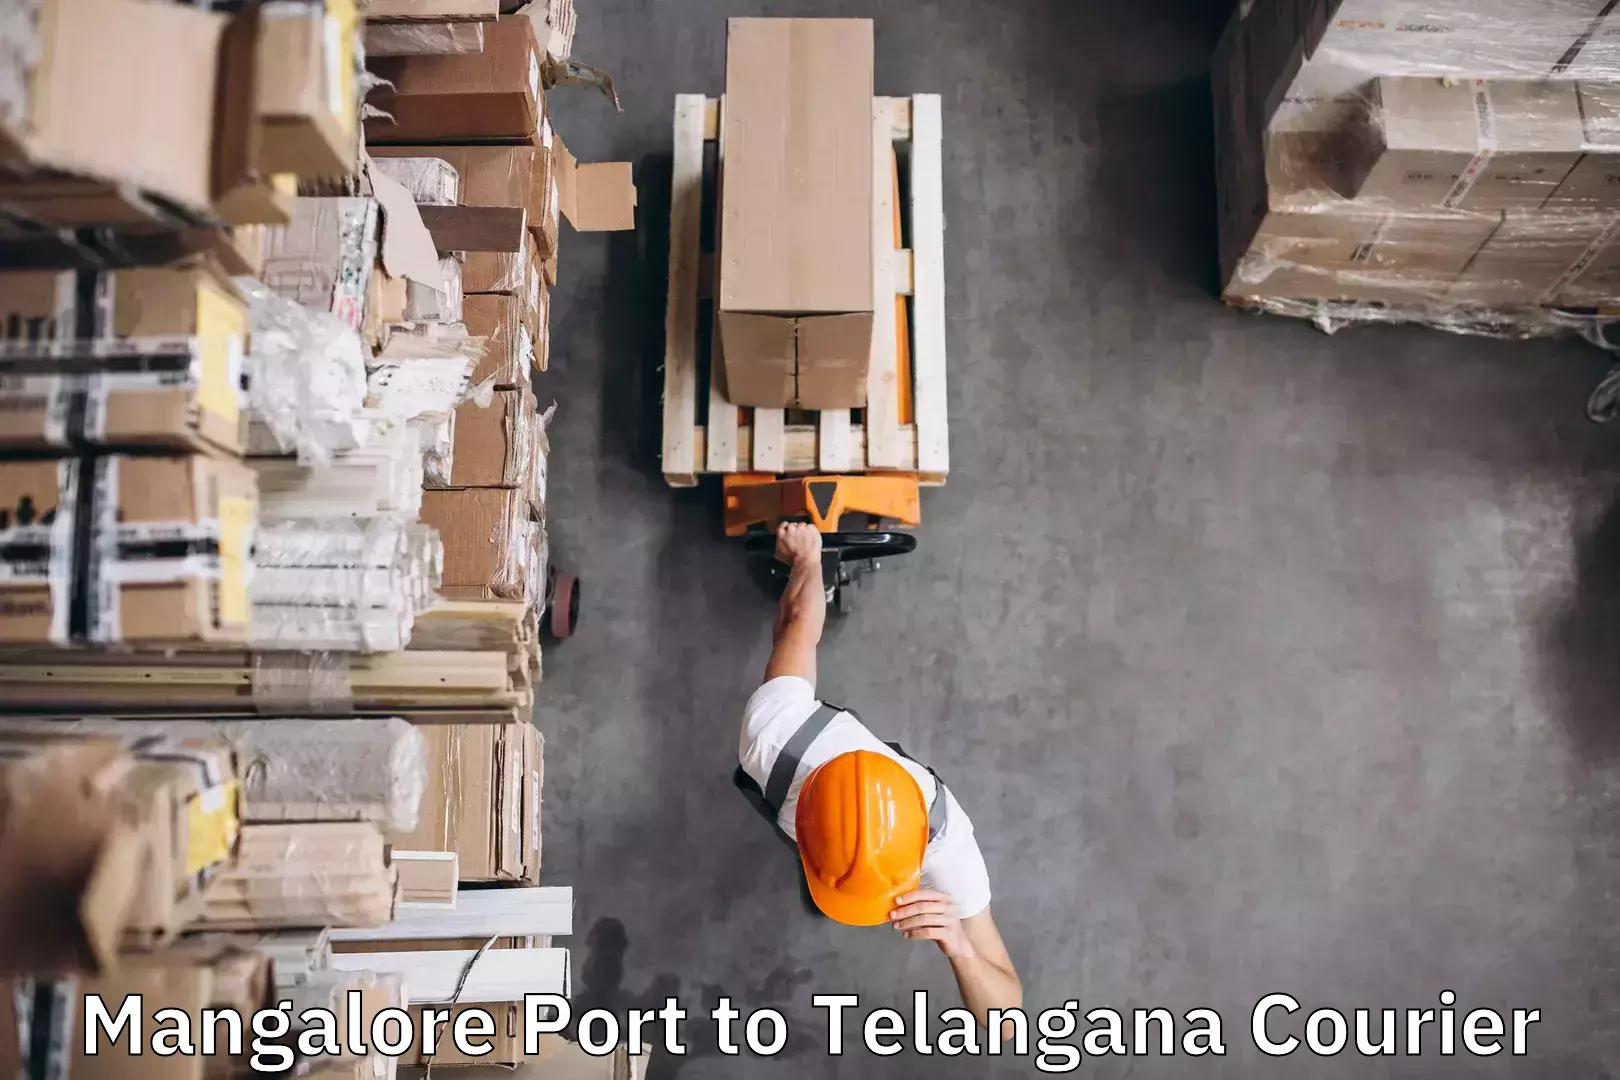 Luggage transport consulting in Mangalore Port to Mogulla Pally